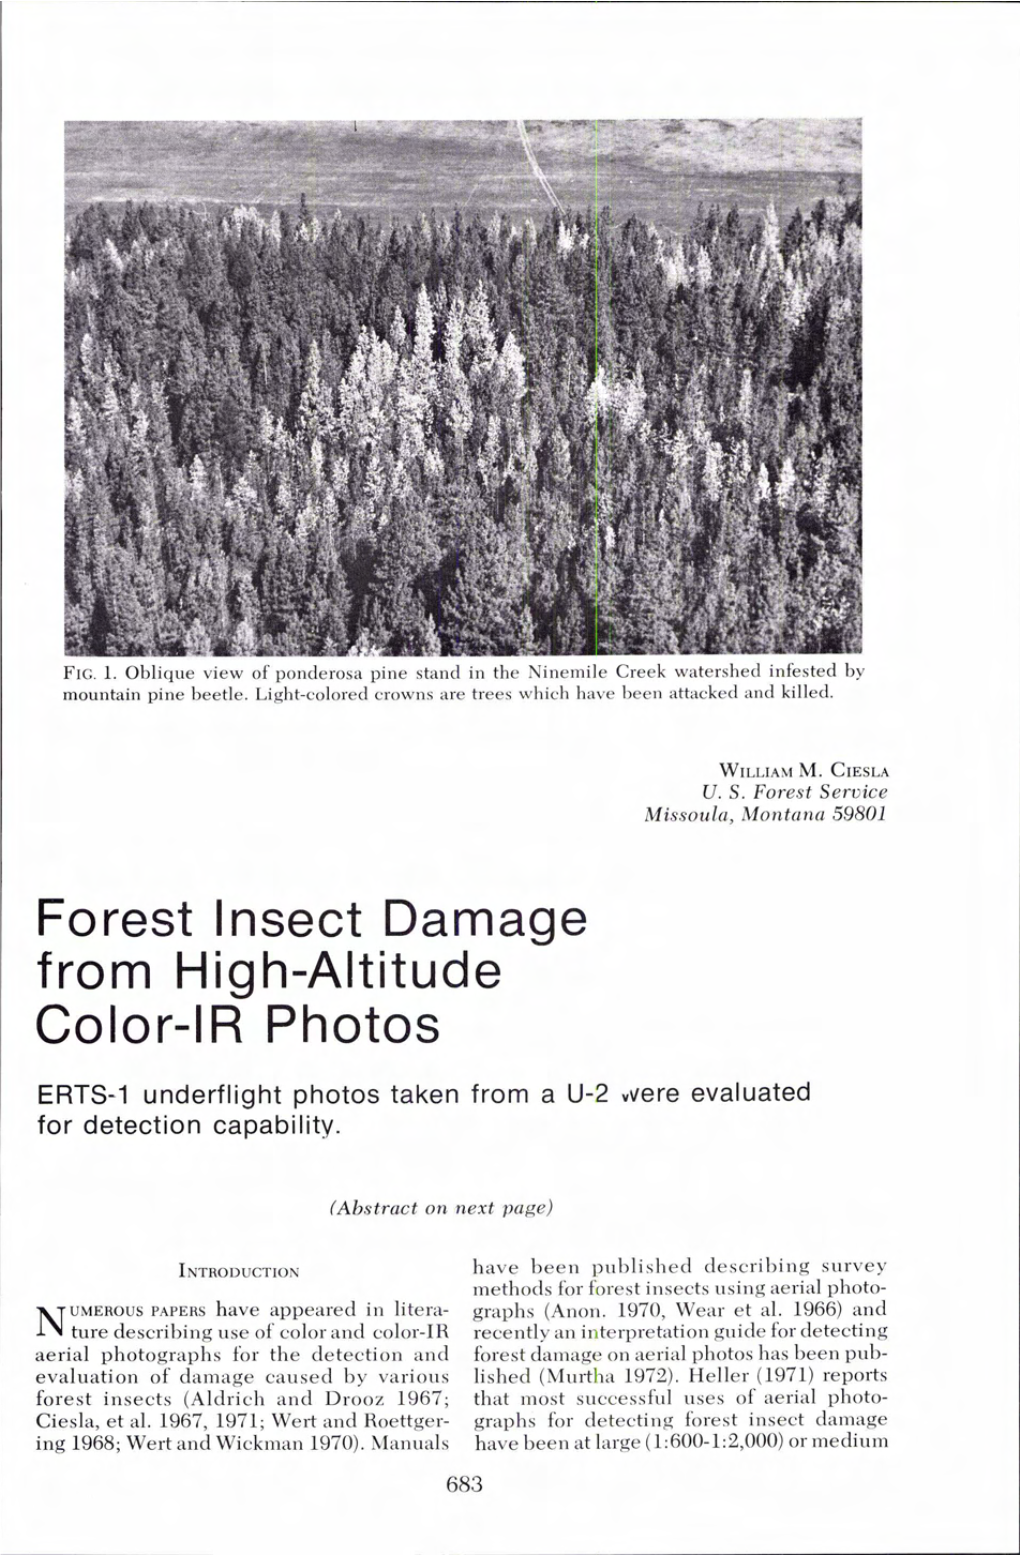 Forest Insect Damage from High-Altitude Color-IR Photos